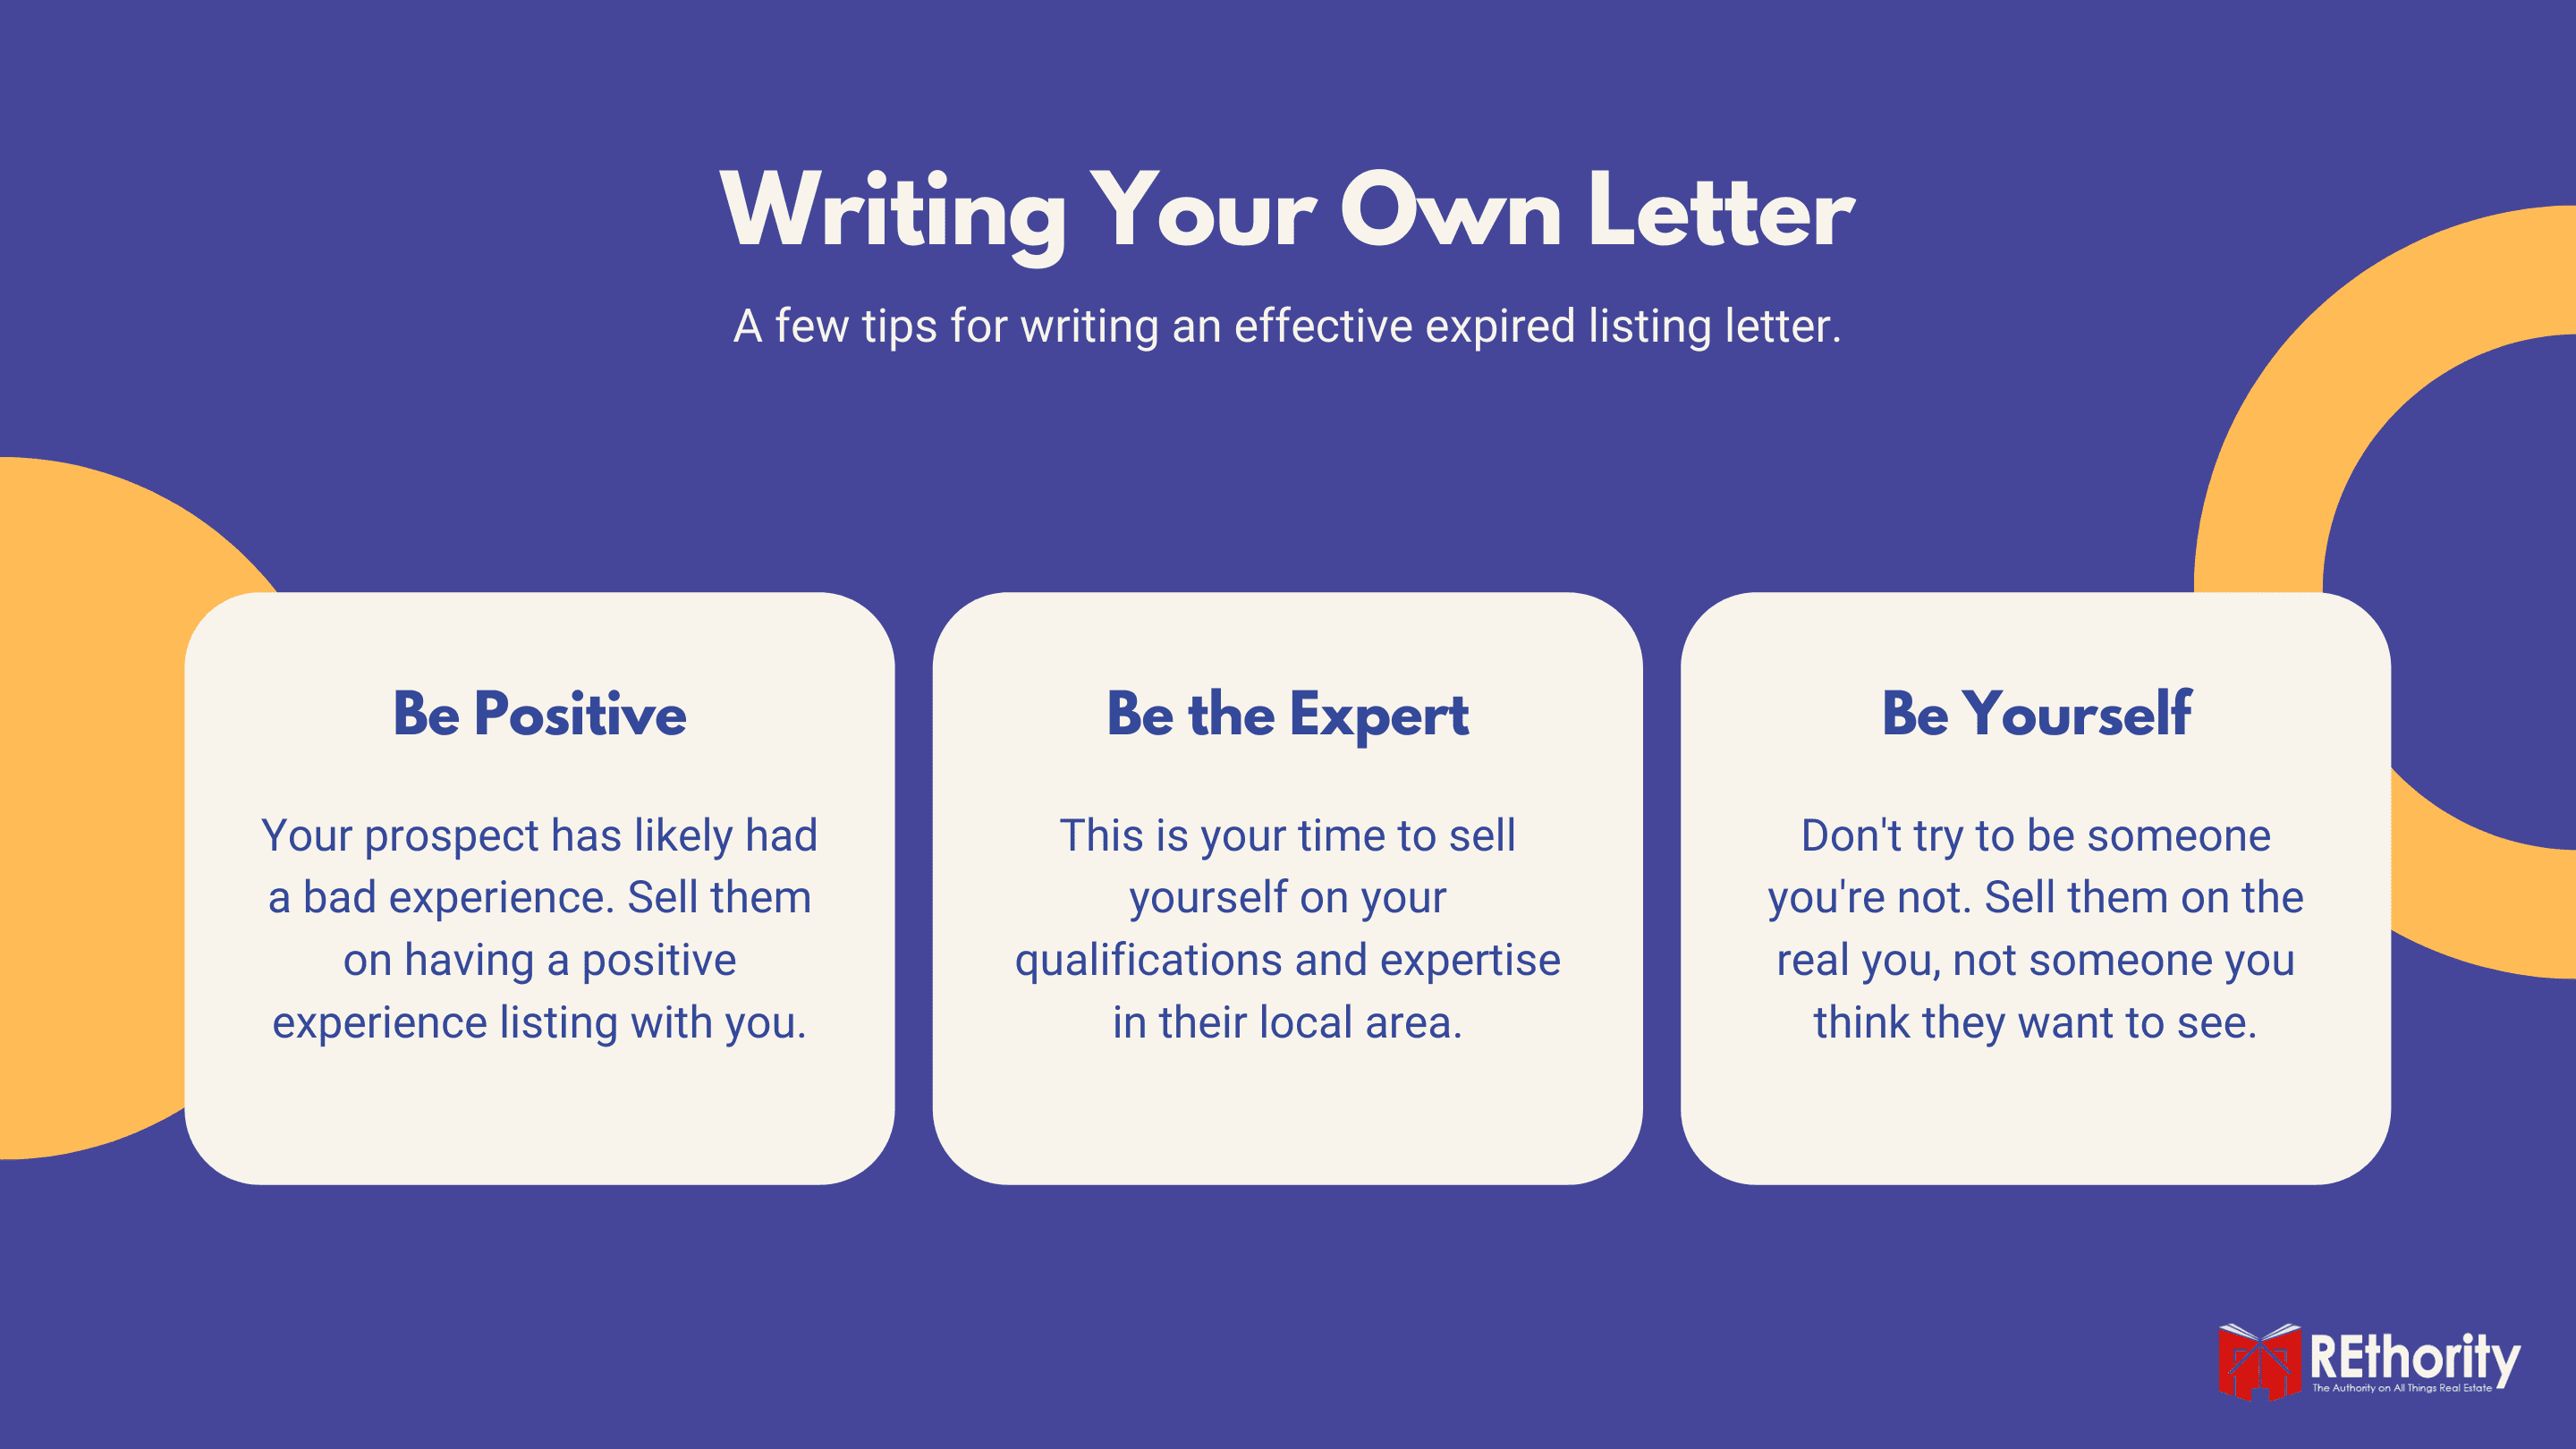 Writing Your Own Letter graphic with three tips for writing an effective expired listing letter